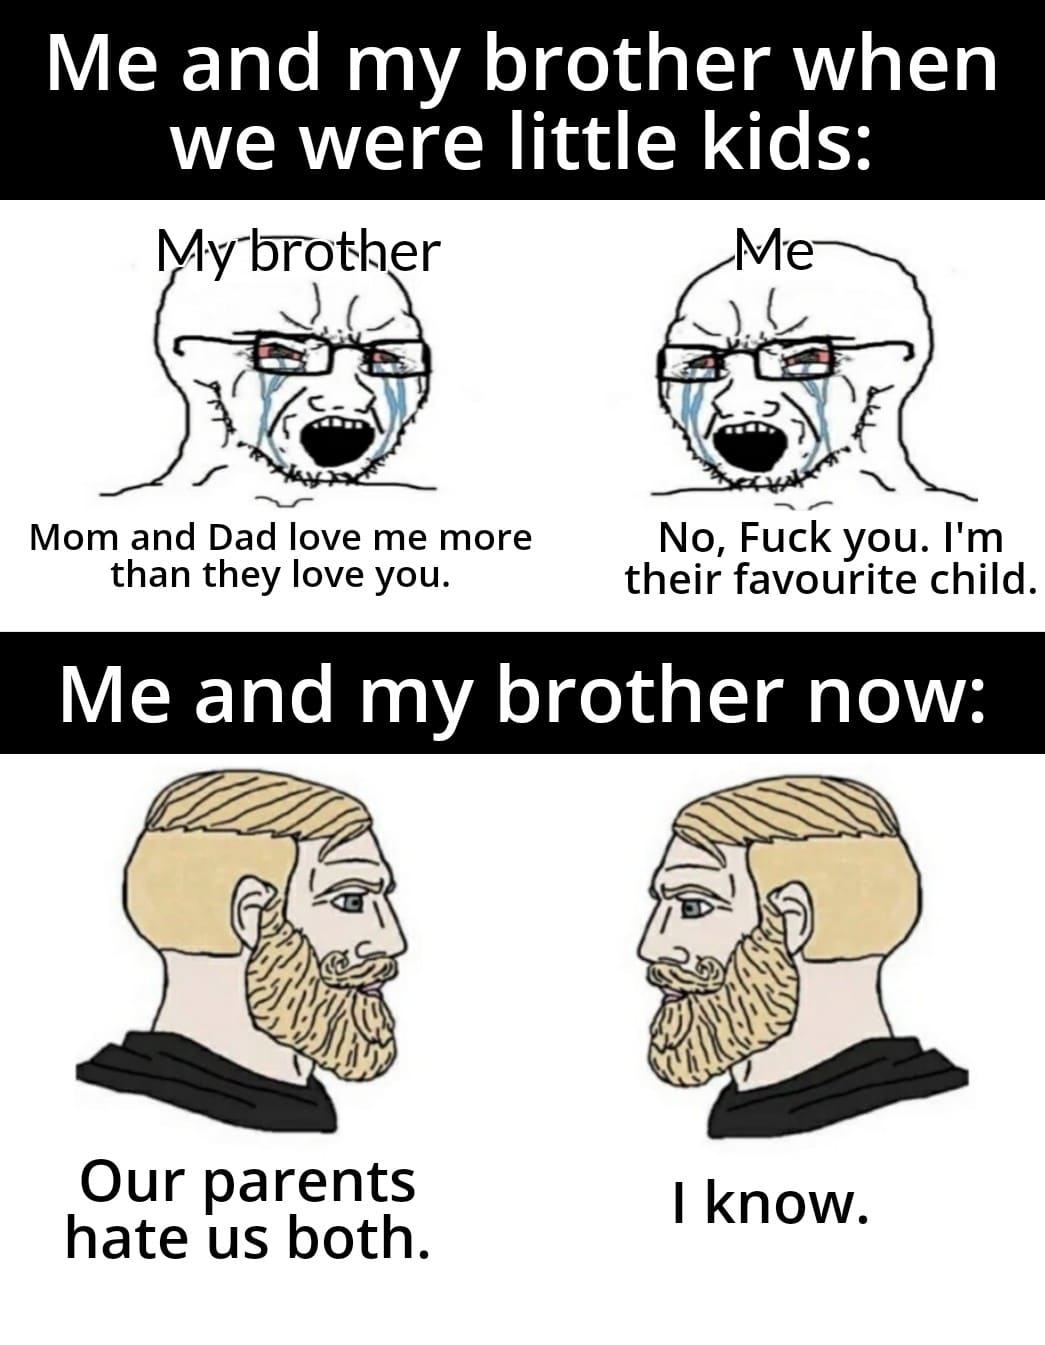 Dank, Mario, FUCK YOU, Cake Day, Br Dank Memes Dank, Mario, FUCK YOU, Cake Day, Br text: Me and my brother when we were little kids: My-brother Mom and Dad love me more than they love you. No, Fuck you. I'm their favourite child. Me and my brother now: Our parents hate us both. I know. 